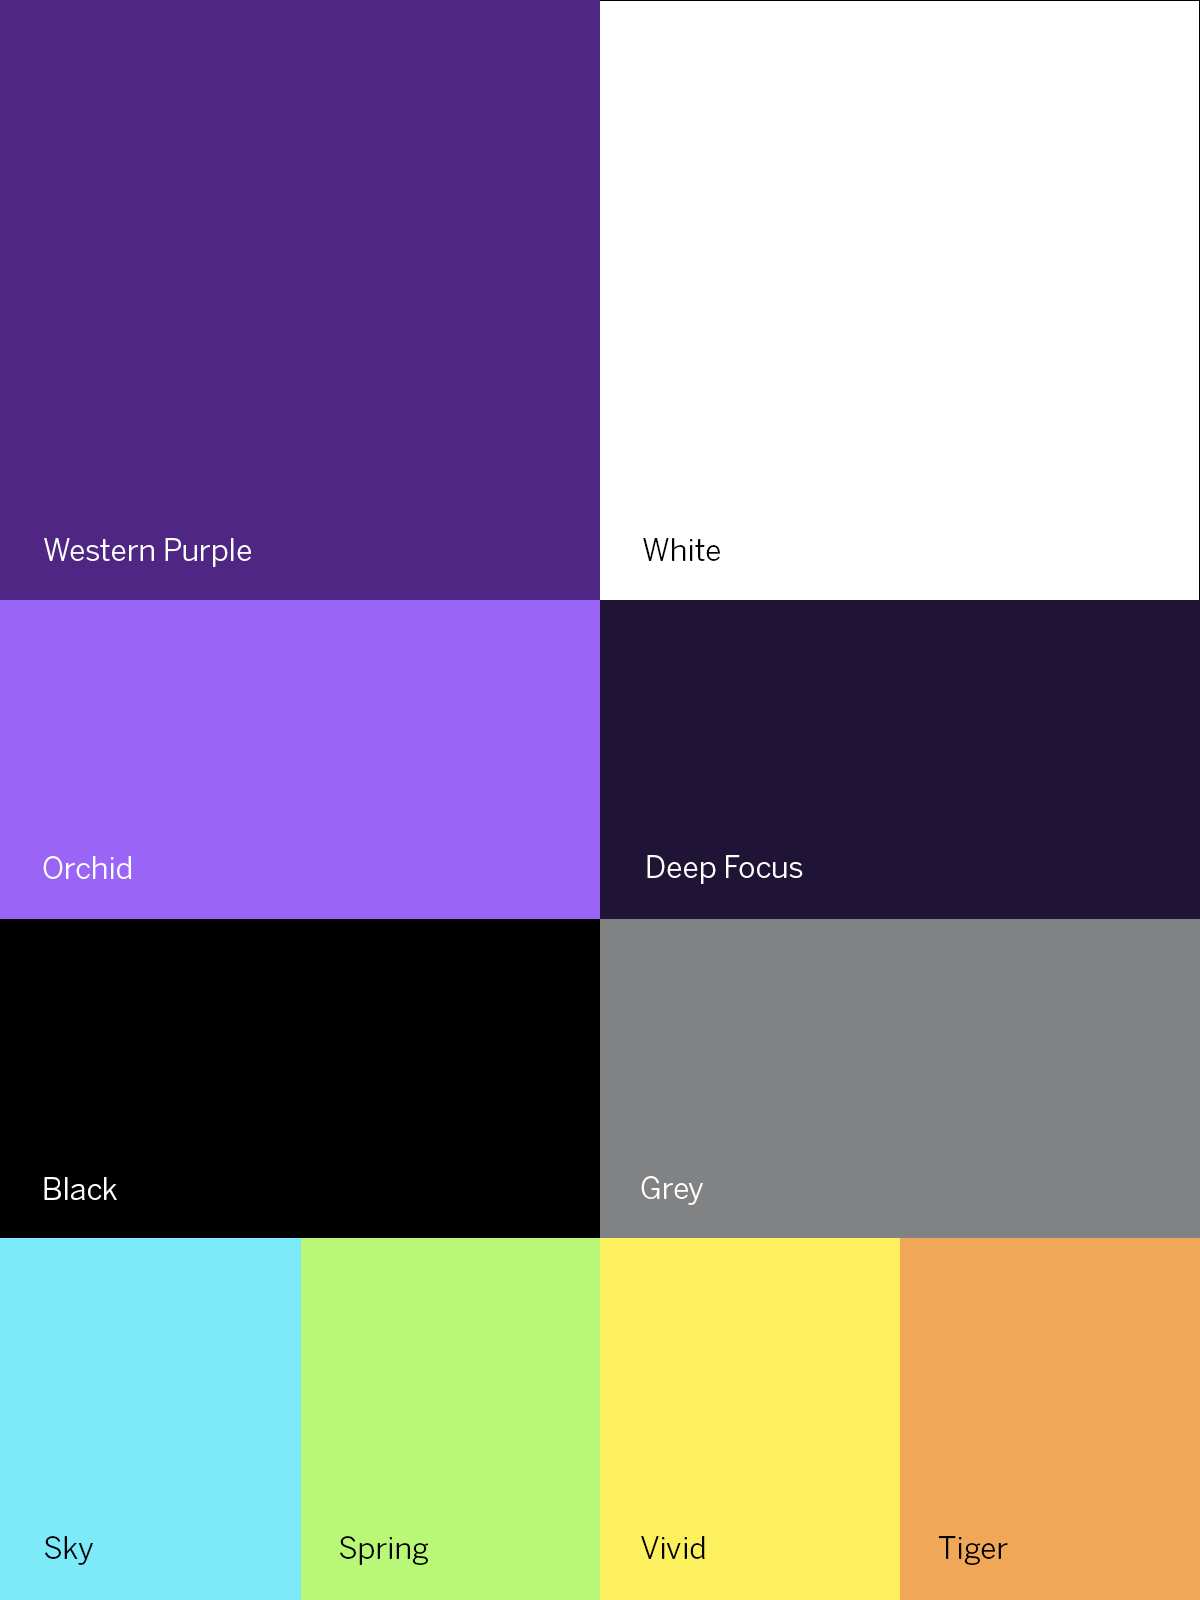 An image of Western's color palette